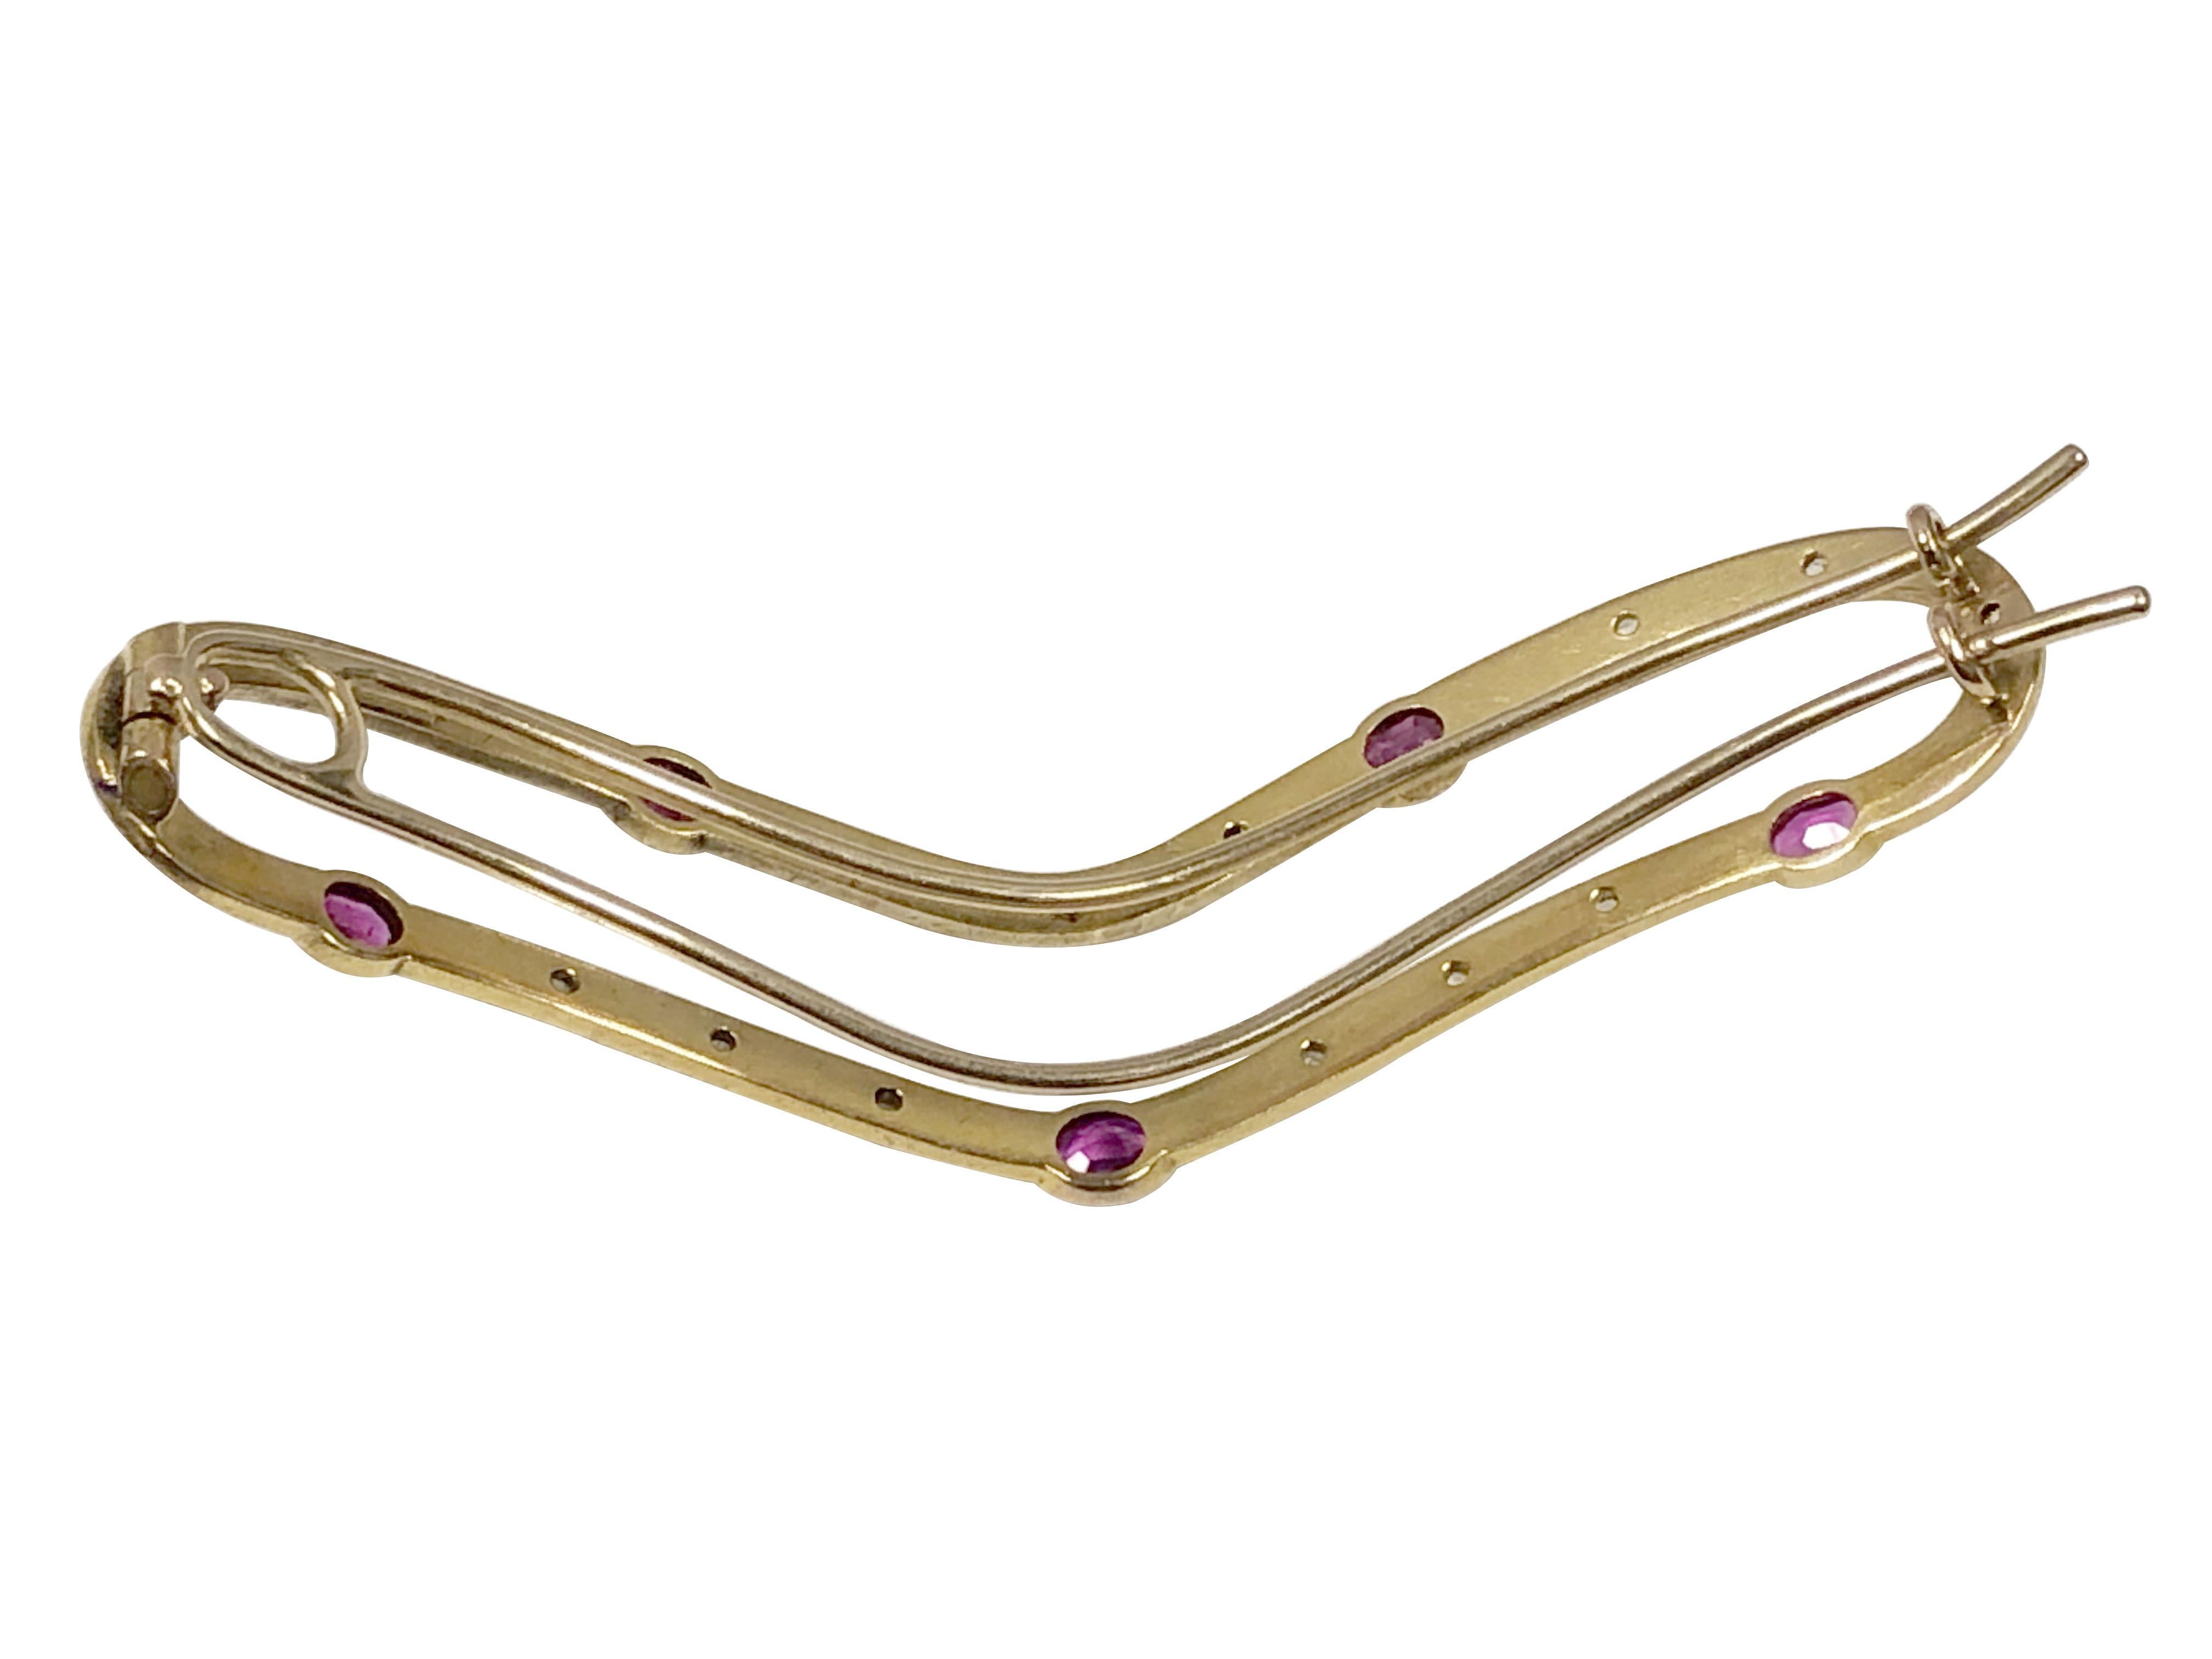 Circa 1900 14k Yellow Gold Hair Barrett, measuring 3 inches in length and 3/4 inch wide, having a Hand Hammered finish, set with Rose cut Diamonds and Fine Color Oval Rubies. 